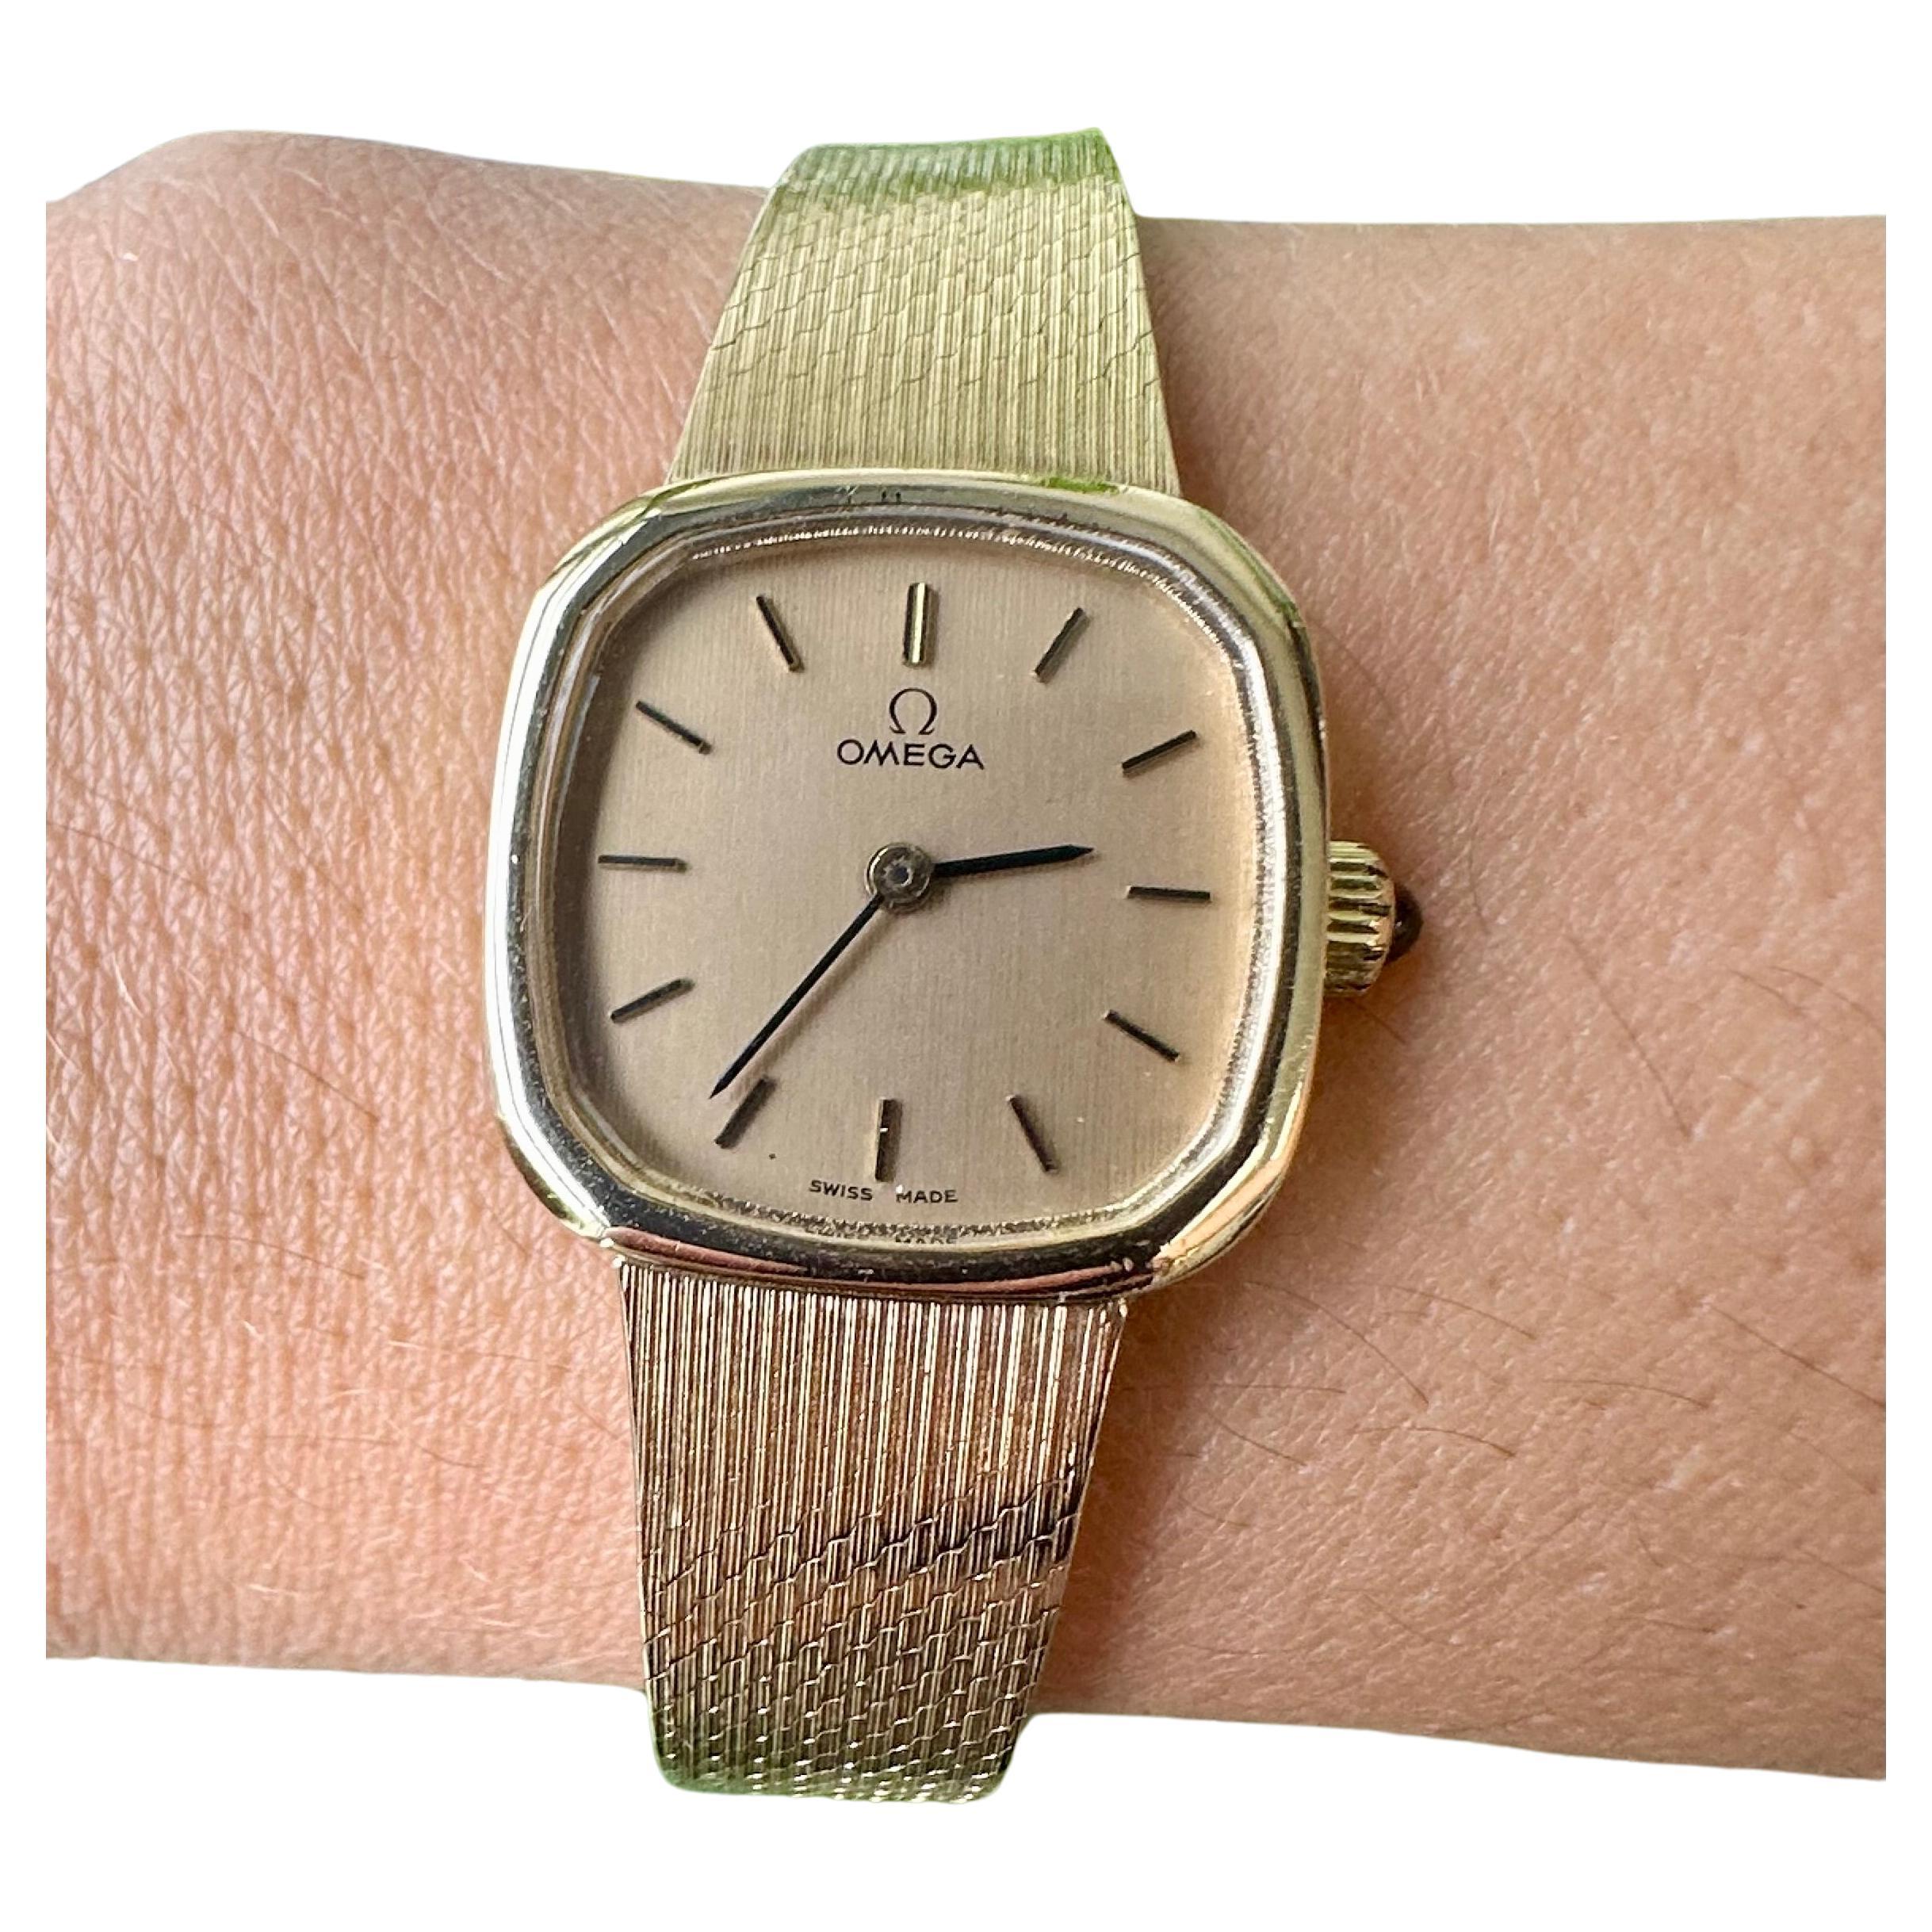  Omega 9k Yellow Gold Watch Manual Wind Vintage Watch For Sale